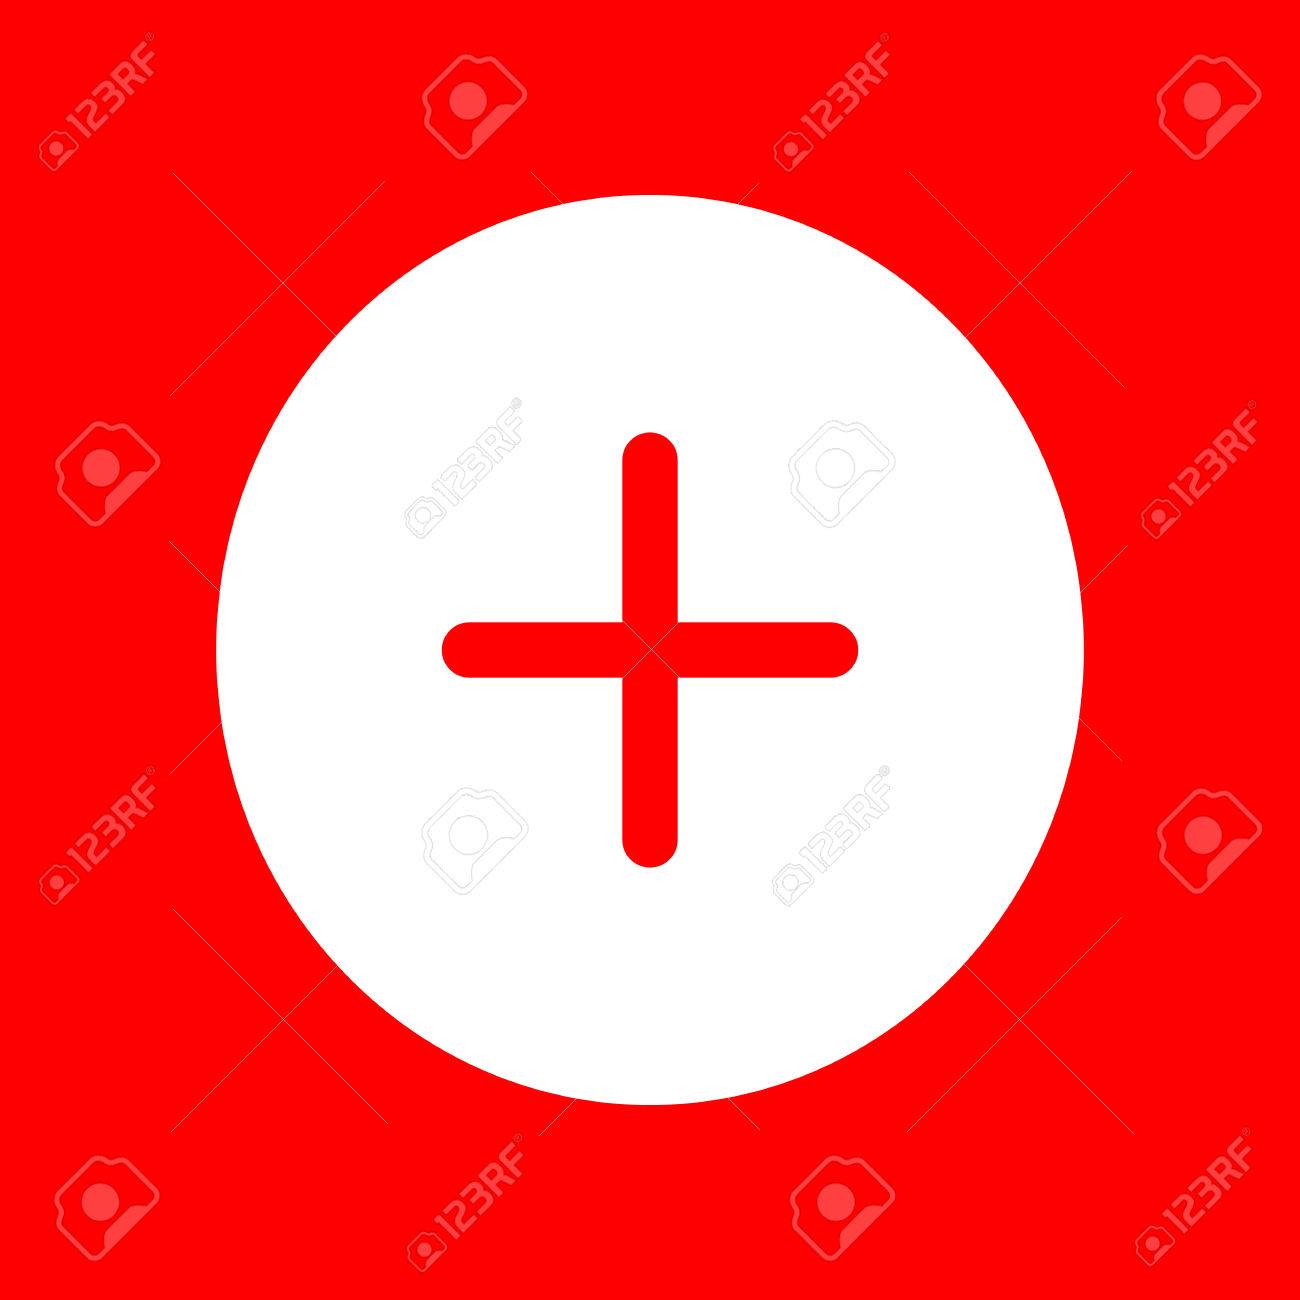 Positive symbol plus sign red icon with Royalty Free Vector